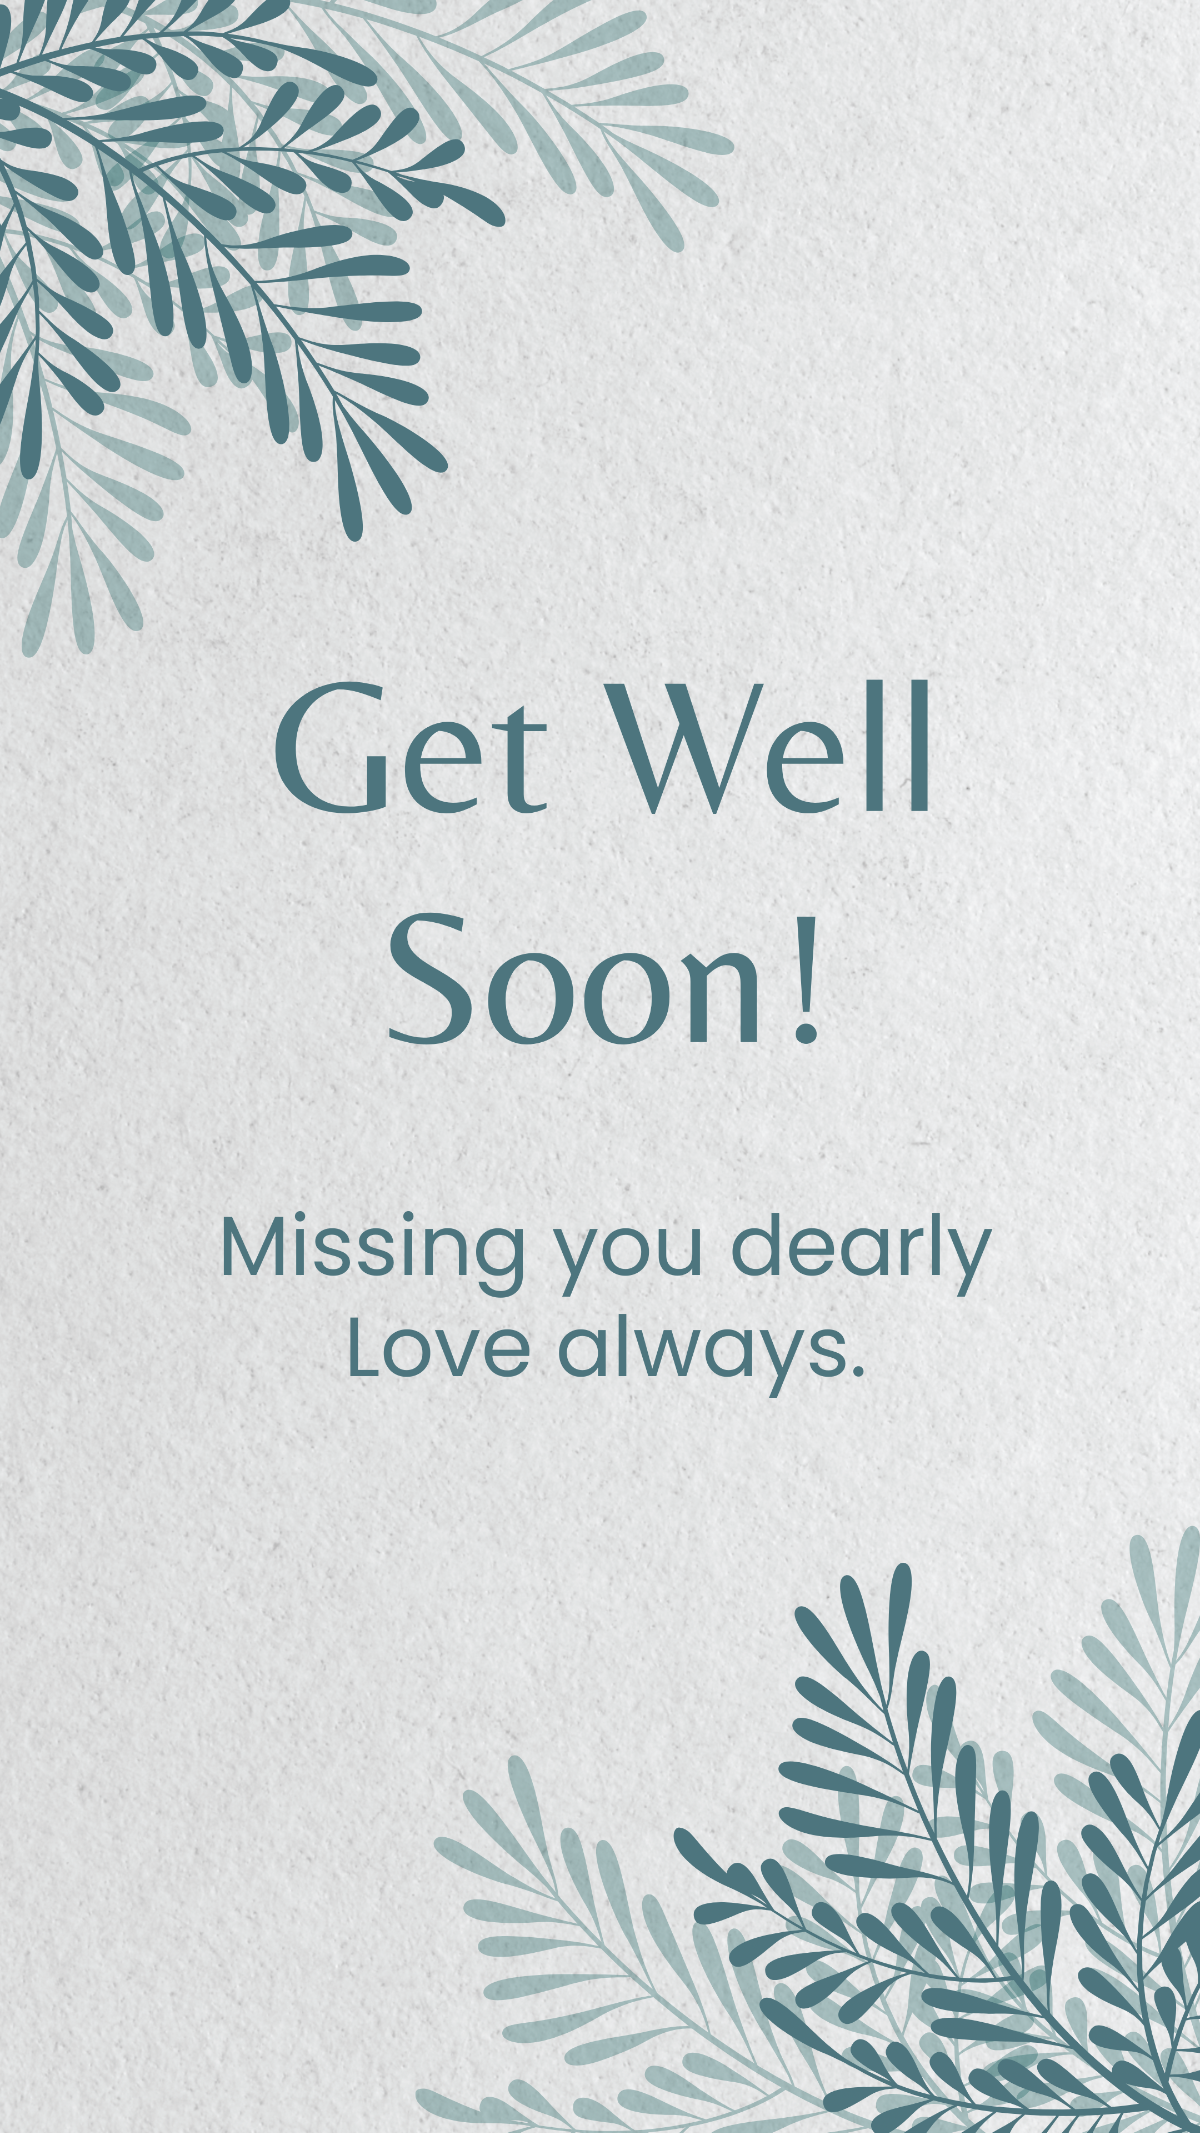 Get Well Soon Letter For Boyfriend Template